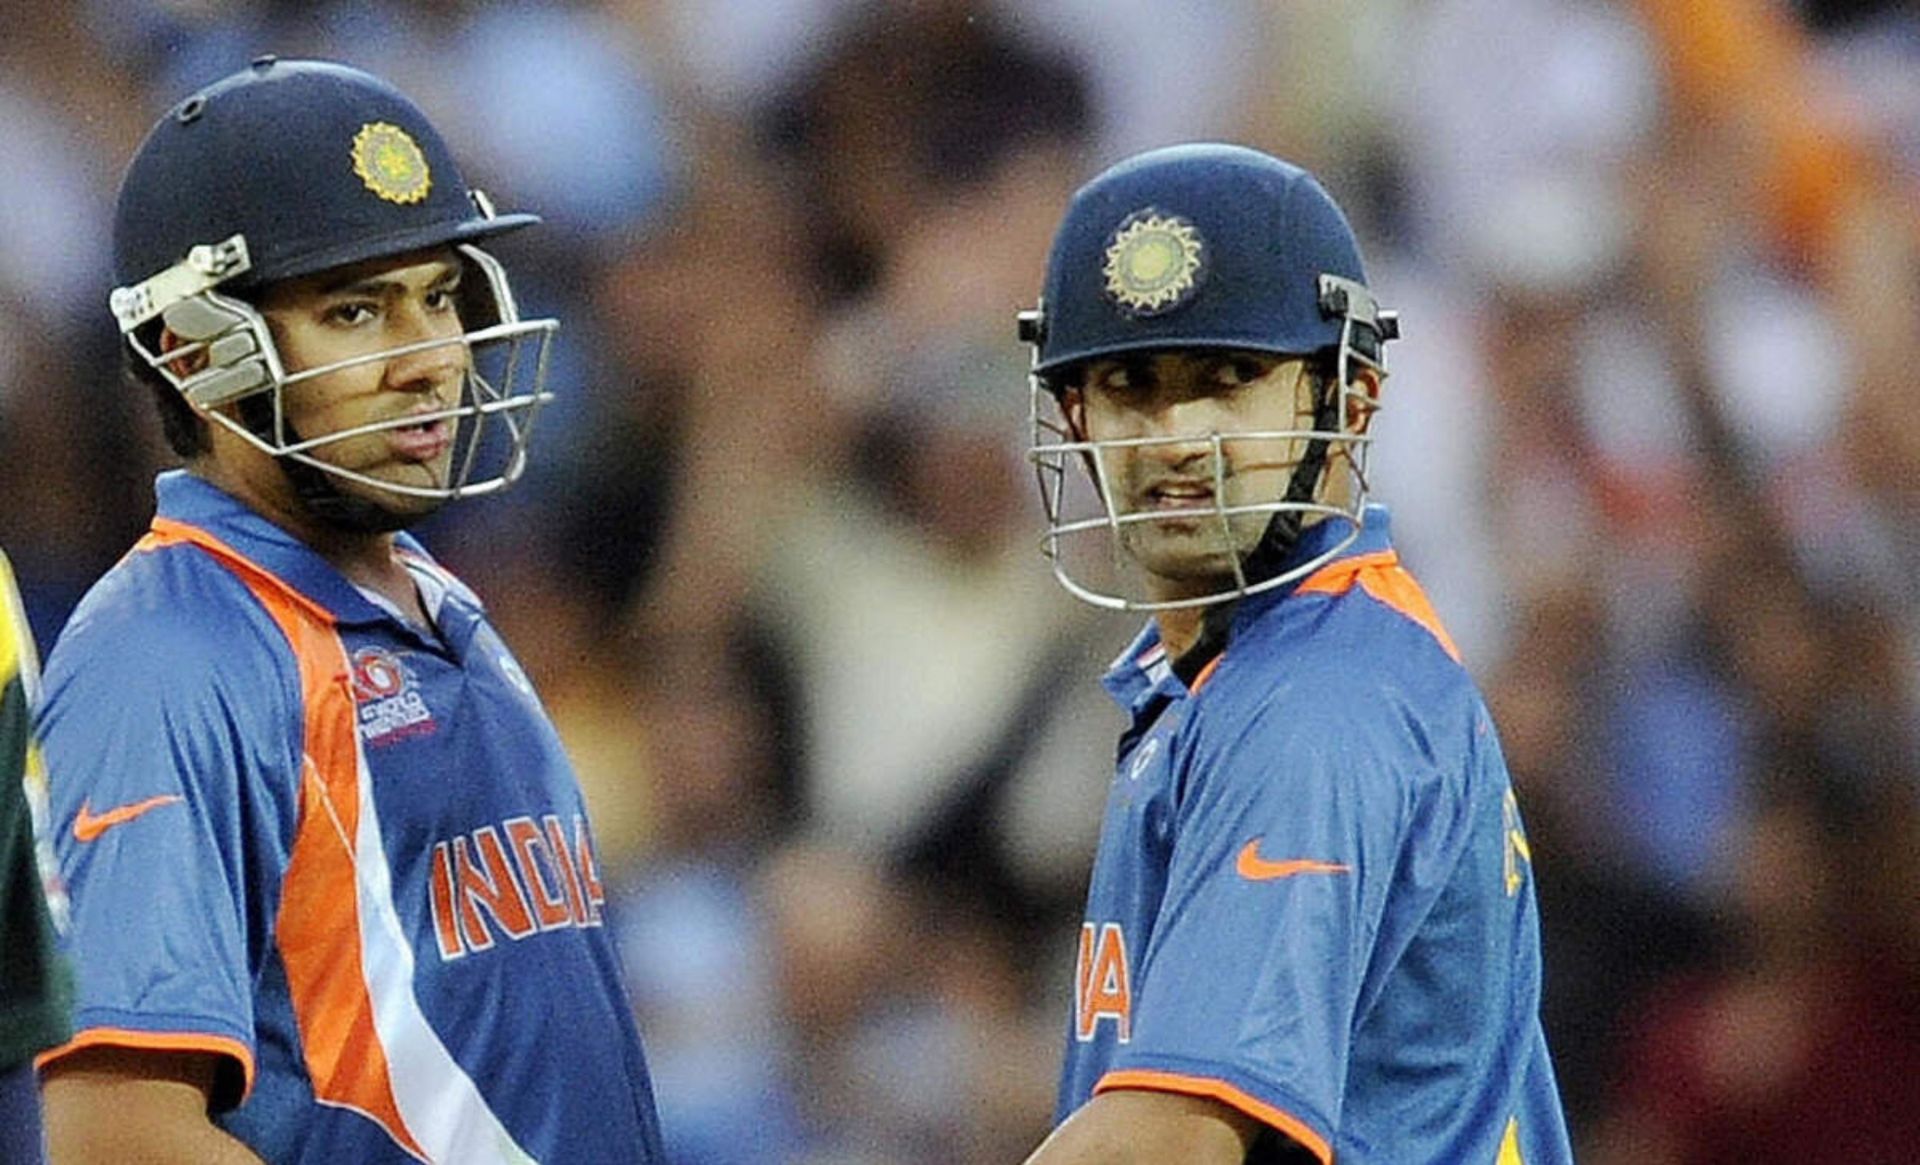 Rohit Sharma and Gautam Gambhir while opening for Team India during the 2009 ICC T20 World Cup. (Credits: ICC)